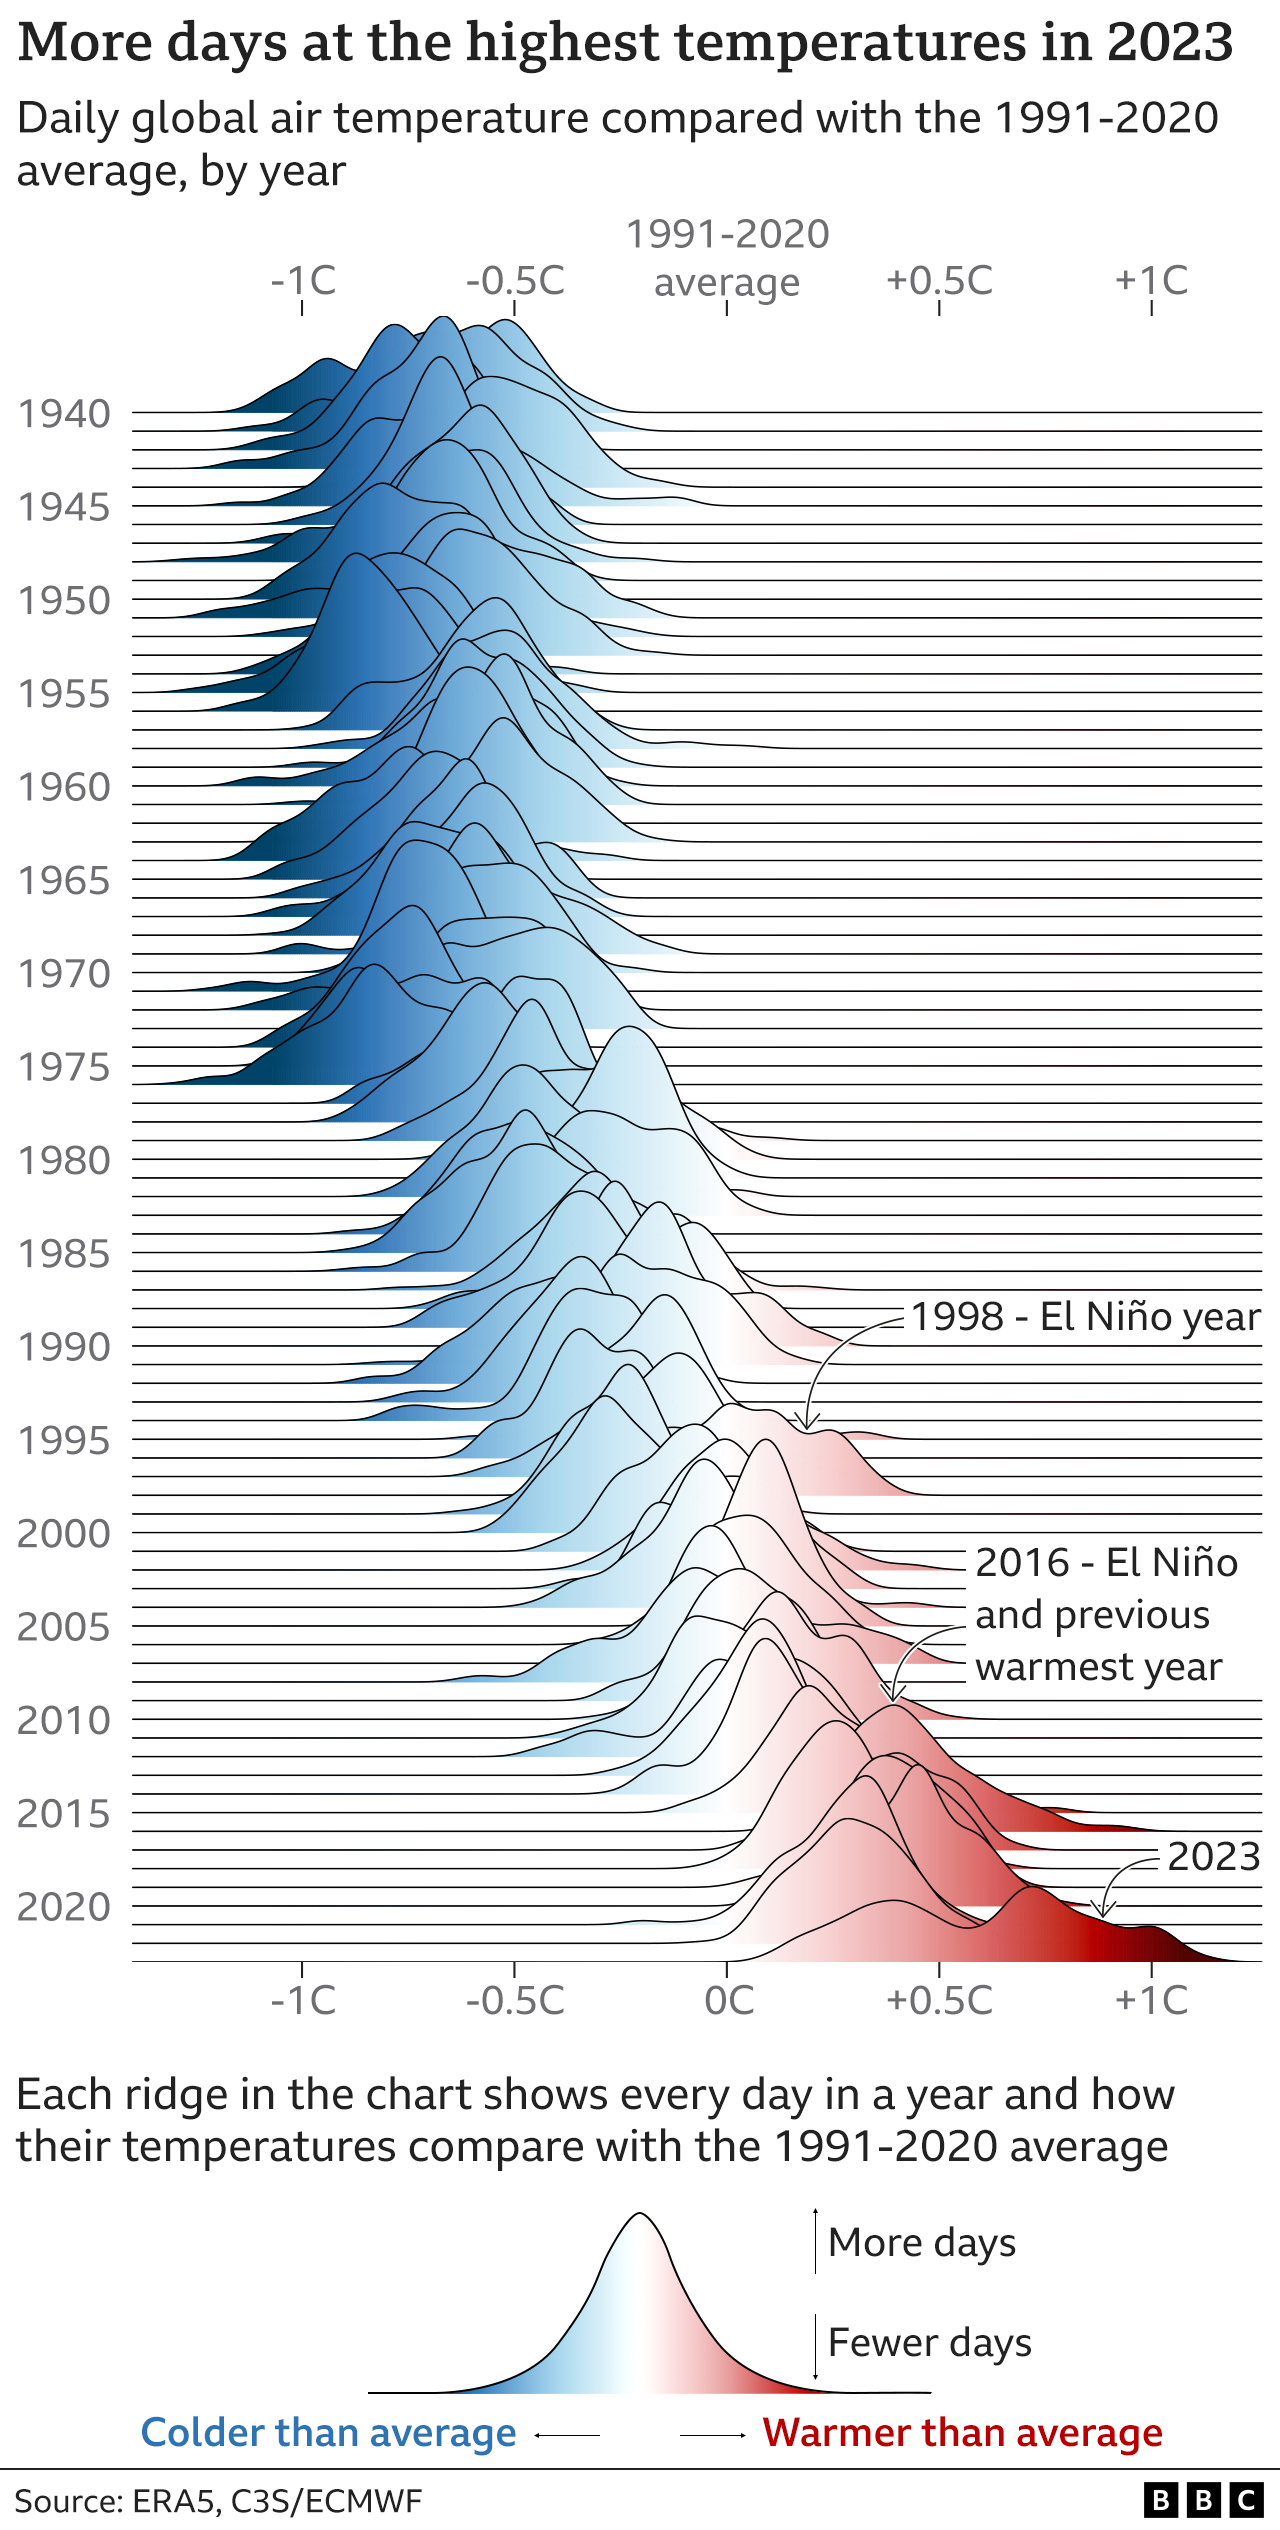 Distribution of global air temperature differences from the 1991-2020 average, for every year between 1940 and 2023. The year 2023 saw temperatures far above any previous year, even compared with those influenced by strong El Nino events like 1998 and 2016.